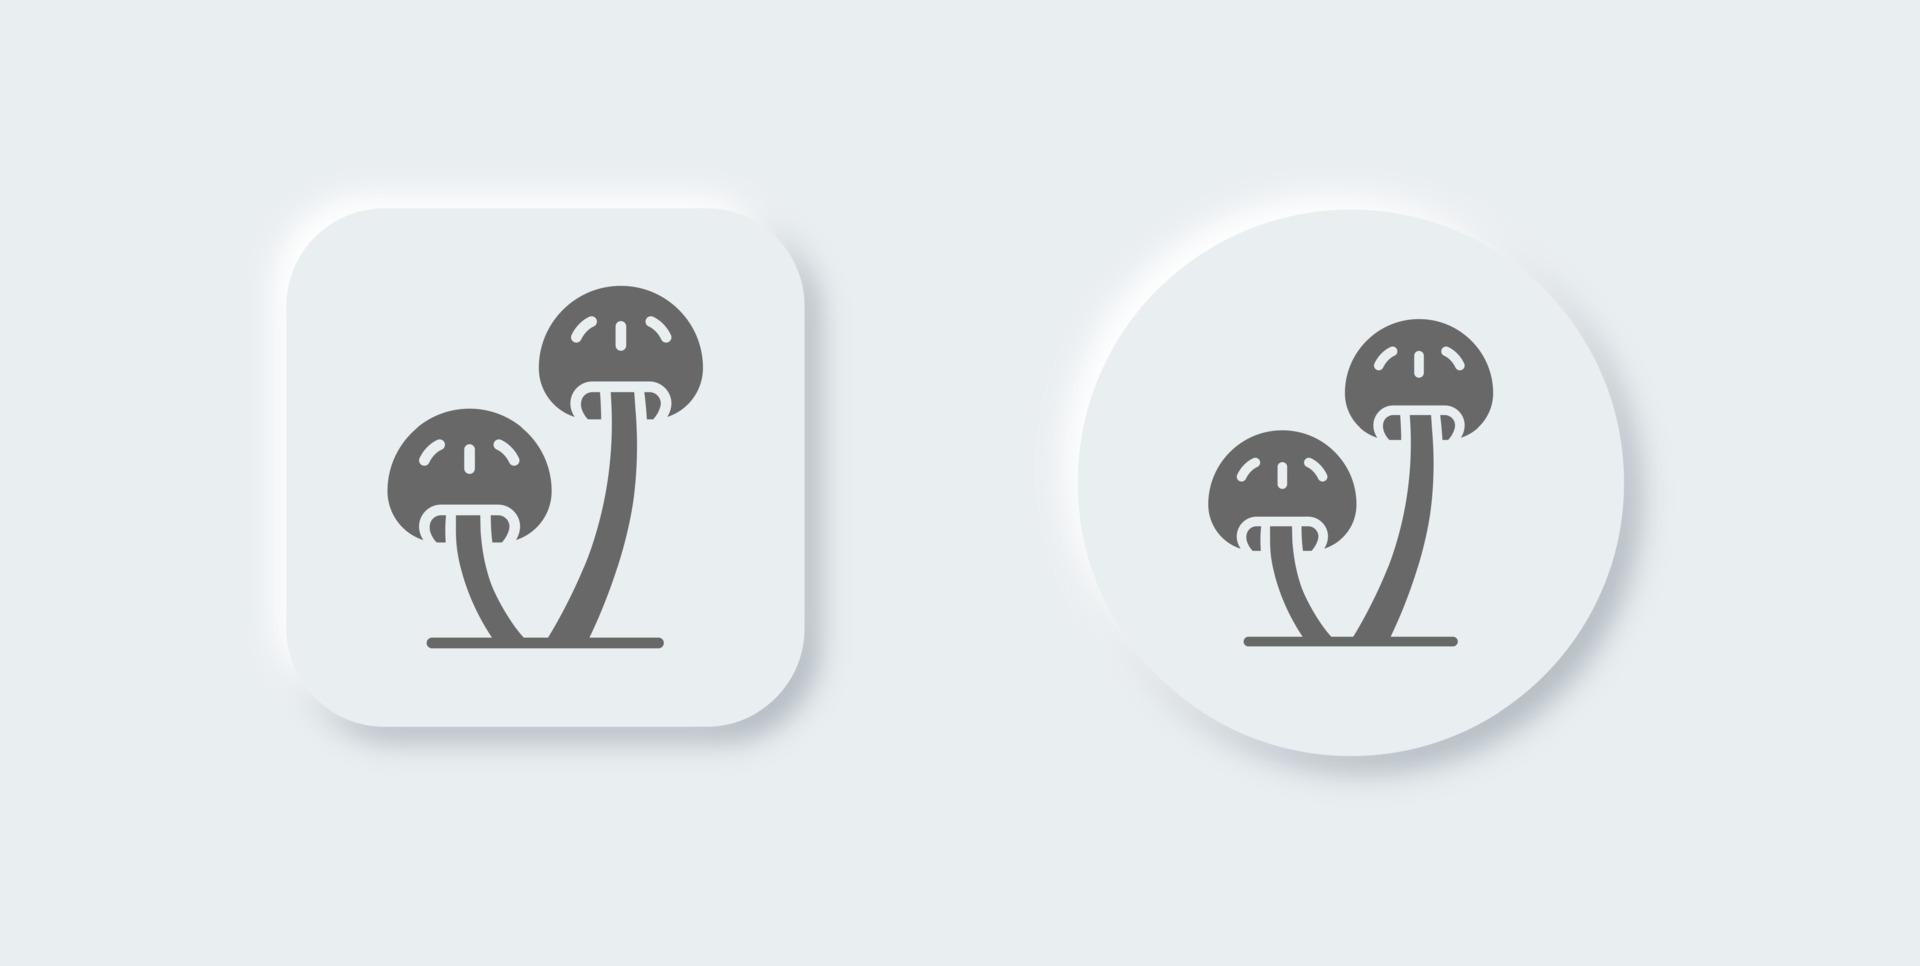 Mushroom solid icon in neomorphic design style. Vegetable signs vector illustration.